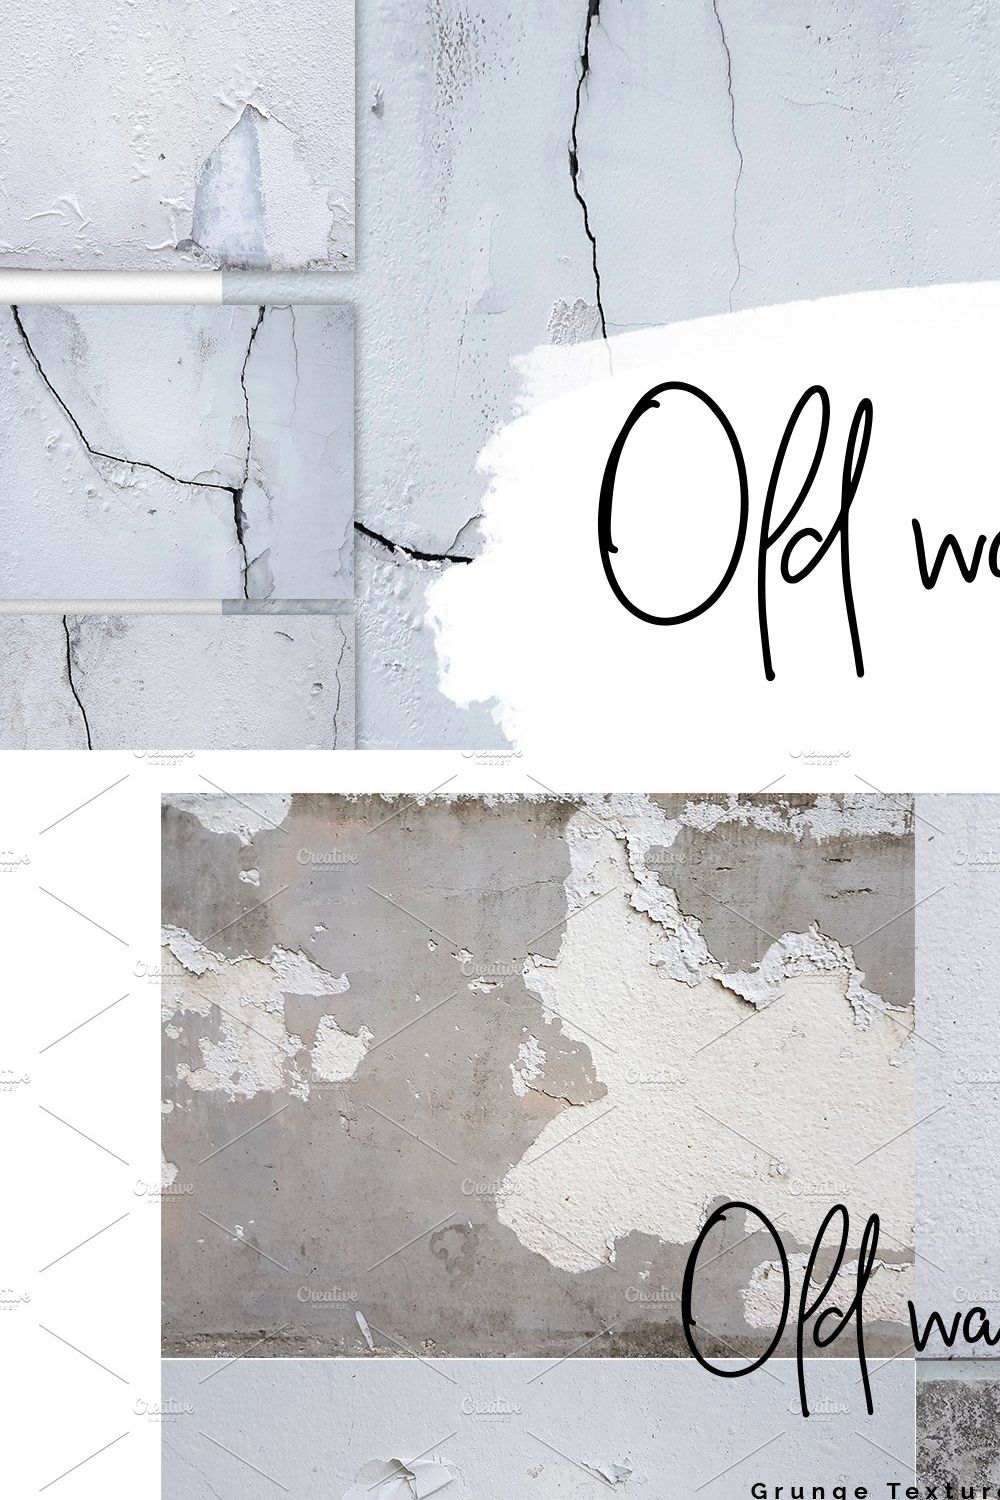 Old Walls Grunge textures pinterest preview image.